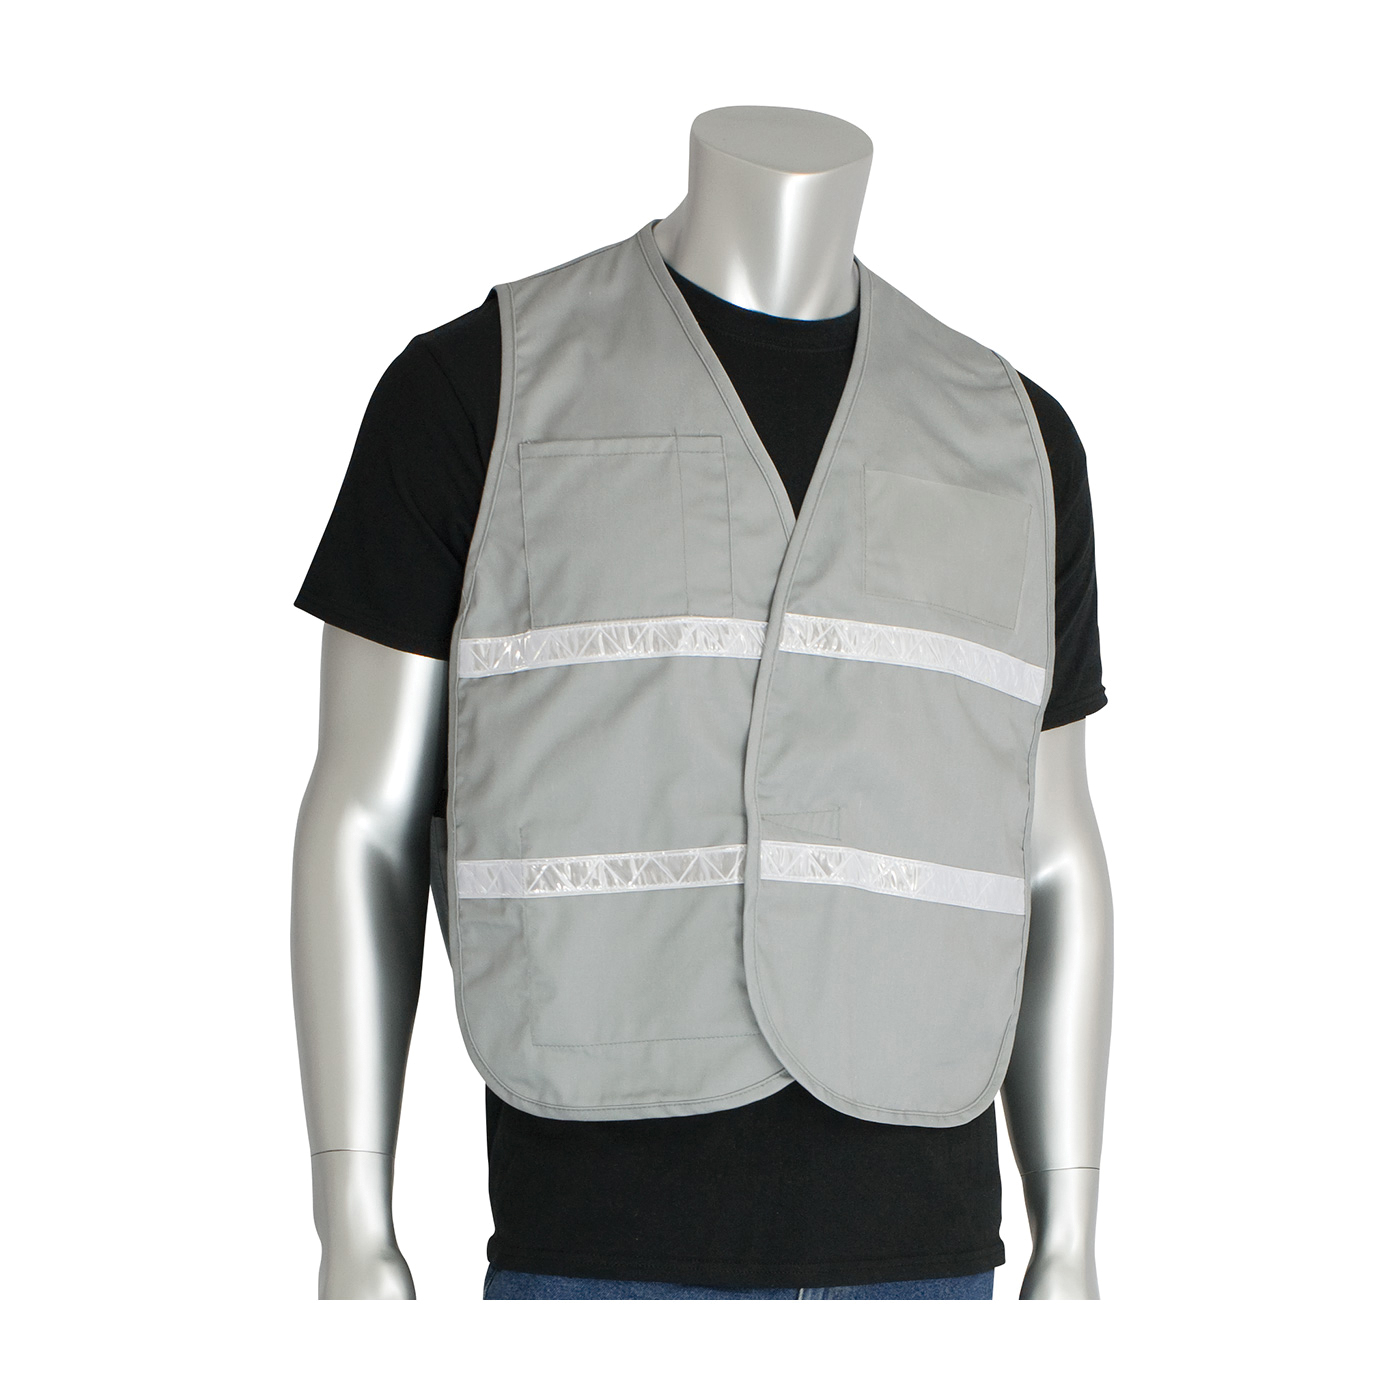 PIP® 300-2515/M-XL 300-2500 Non-ANSI Incident Command Vest, M/XL, Gray, 35% Cotton/65% Polyester, Hook and Loop Closure, 4 Pockets